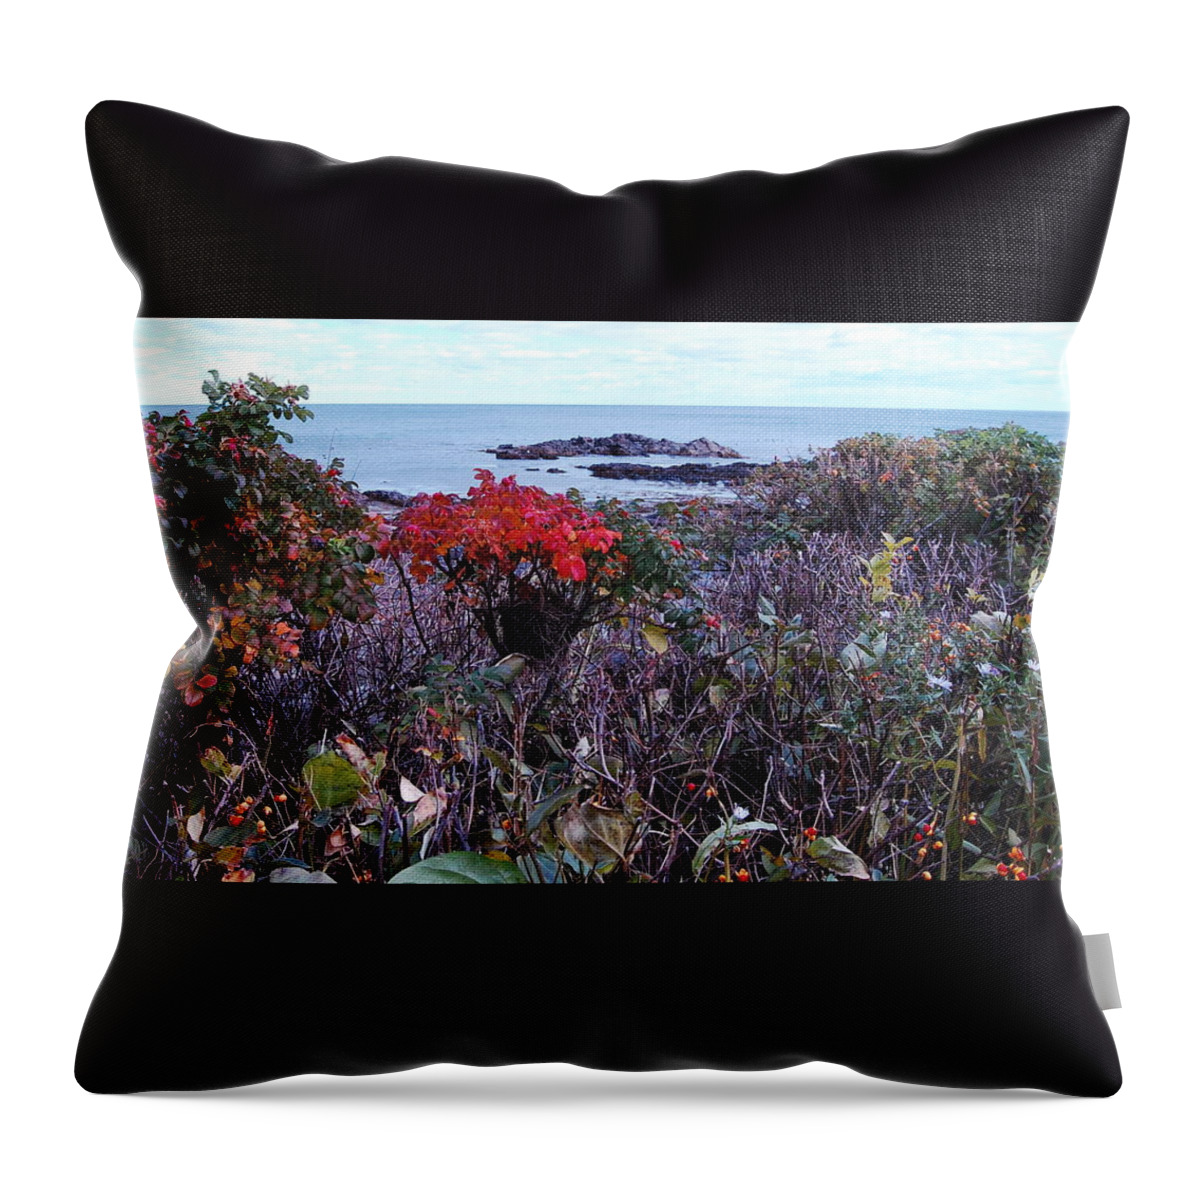 Seascape Throw Pillow featuring the photograph Rosehip by Mim White